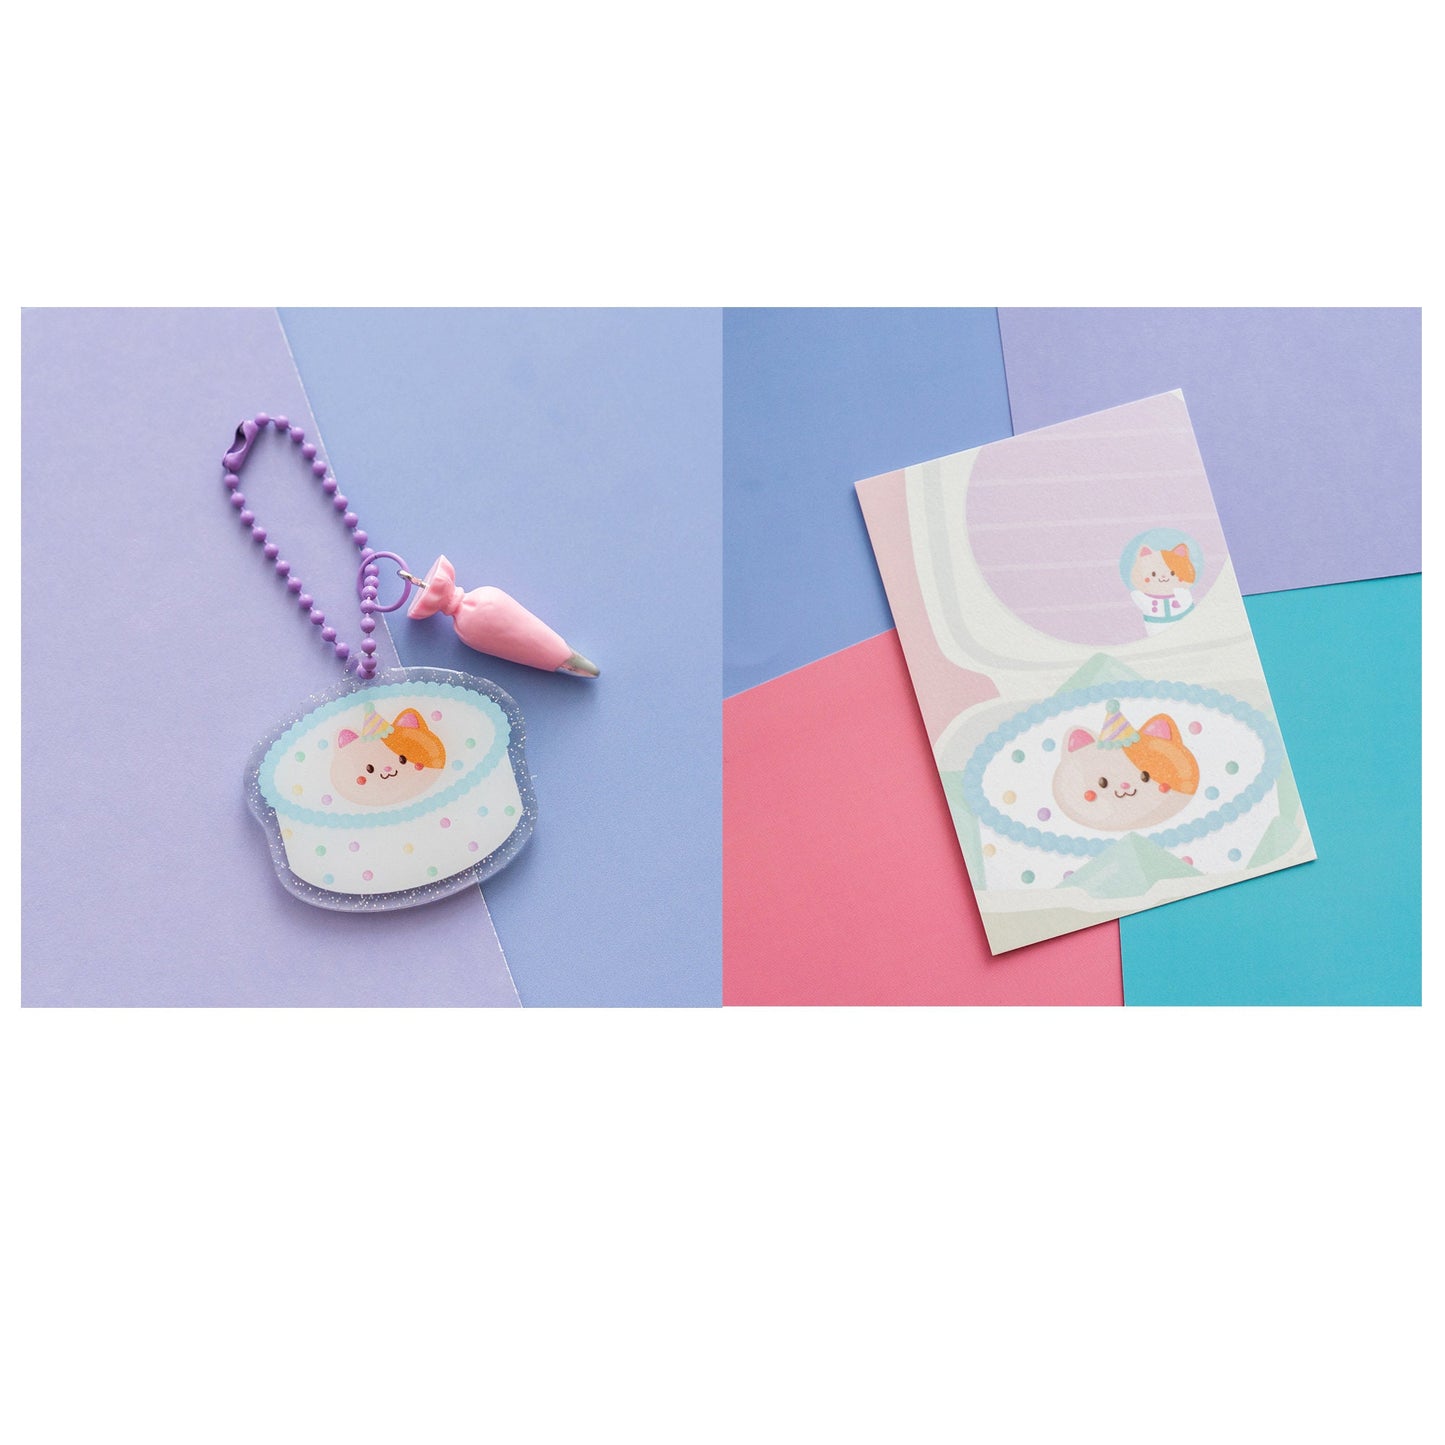 Space Nyan Vintage Cake with Piping Bag Charm Acrylic Journal Keyring Keychain